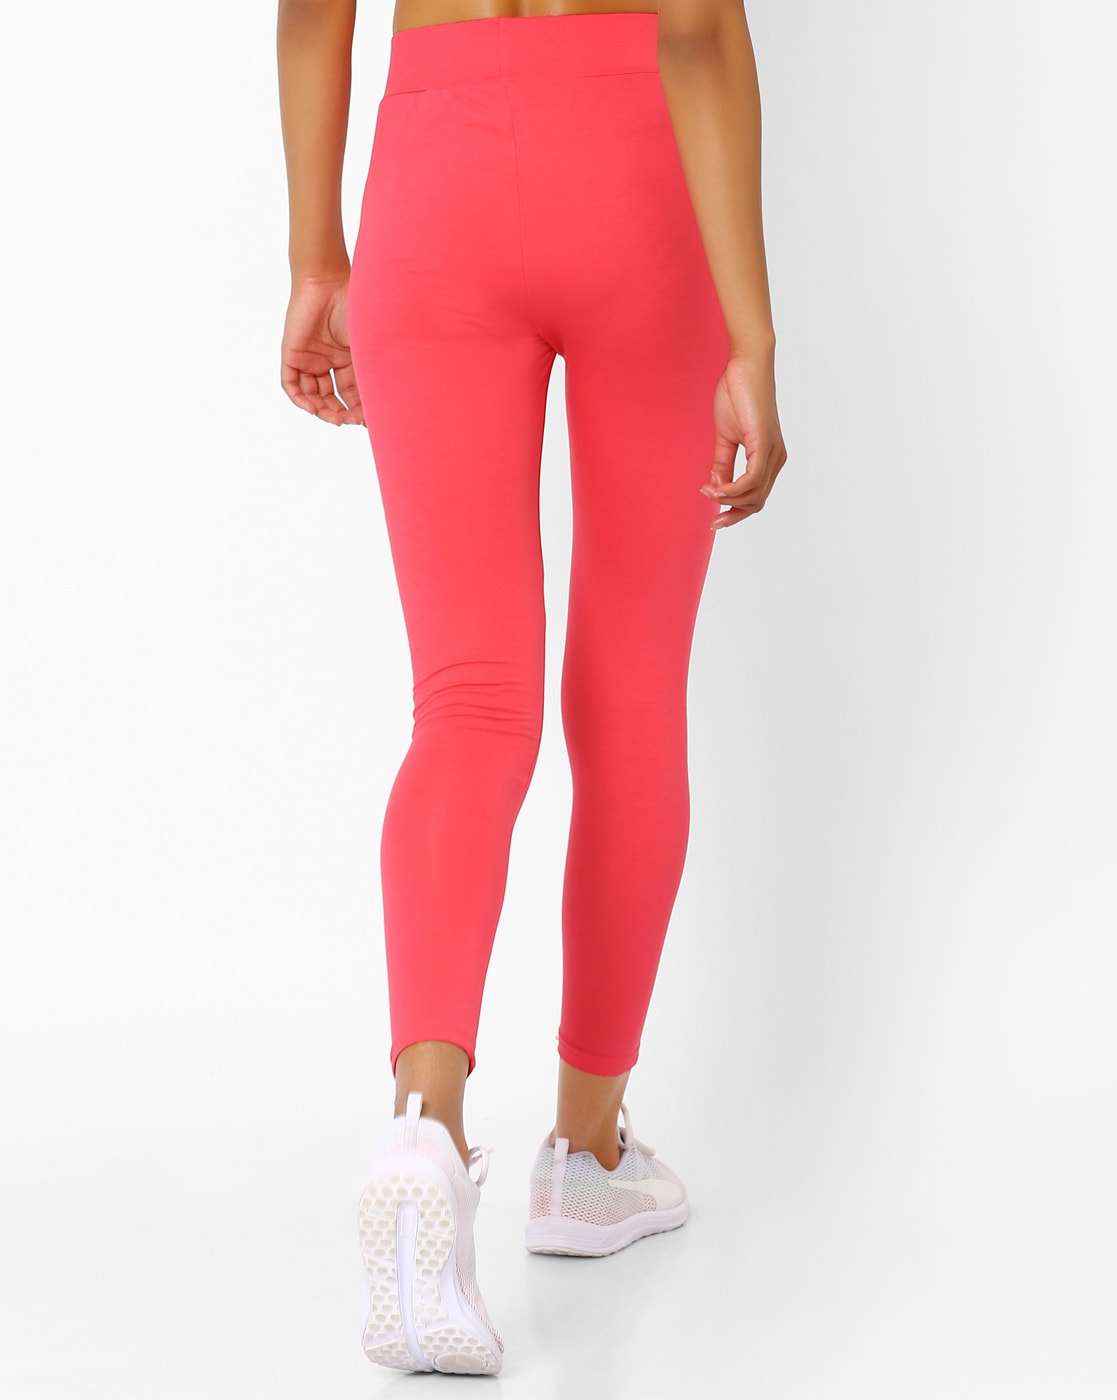 Ladies Pockets Sweatpant for Causal Wears